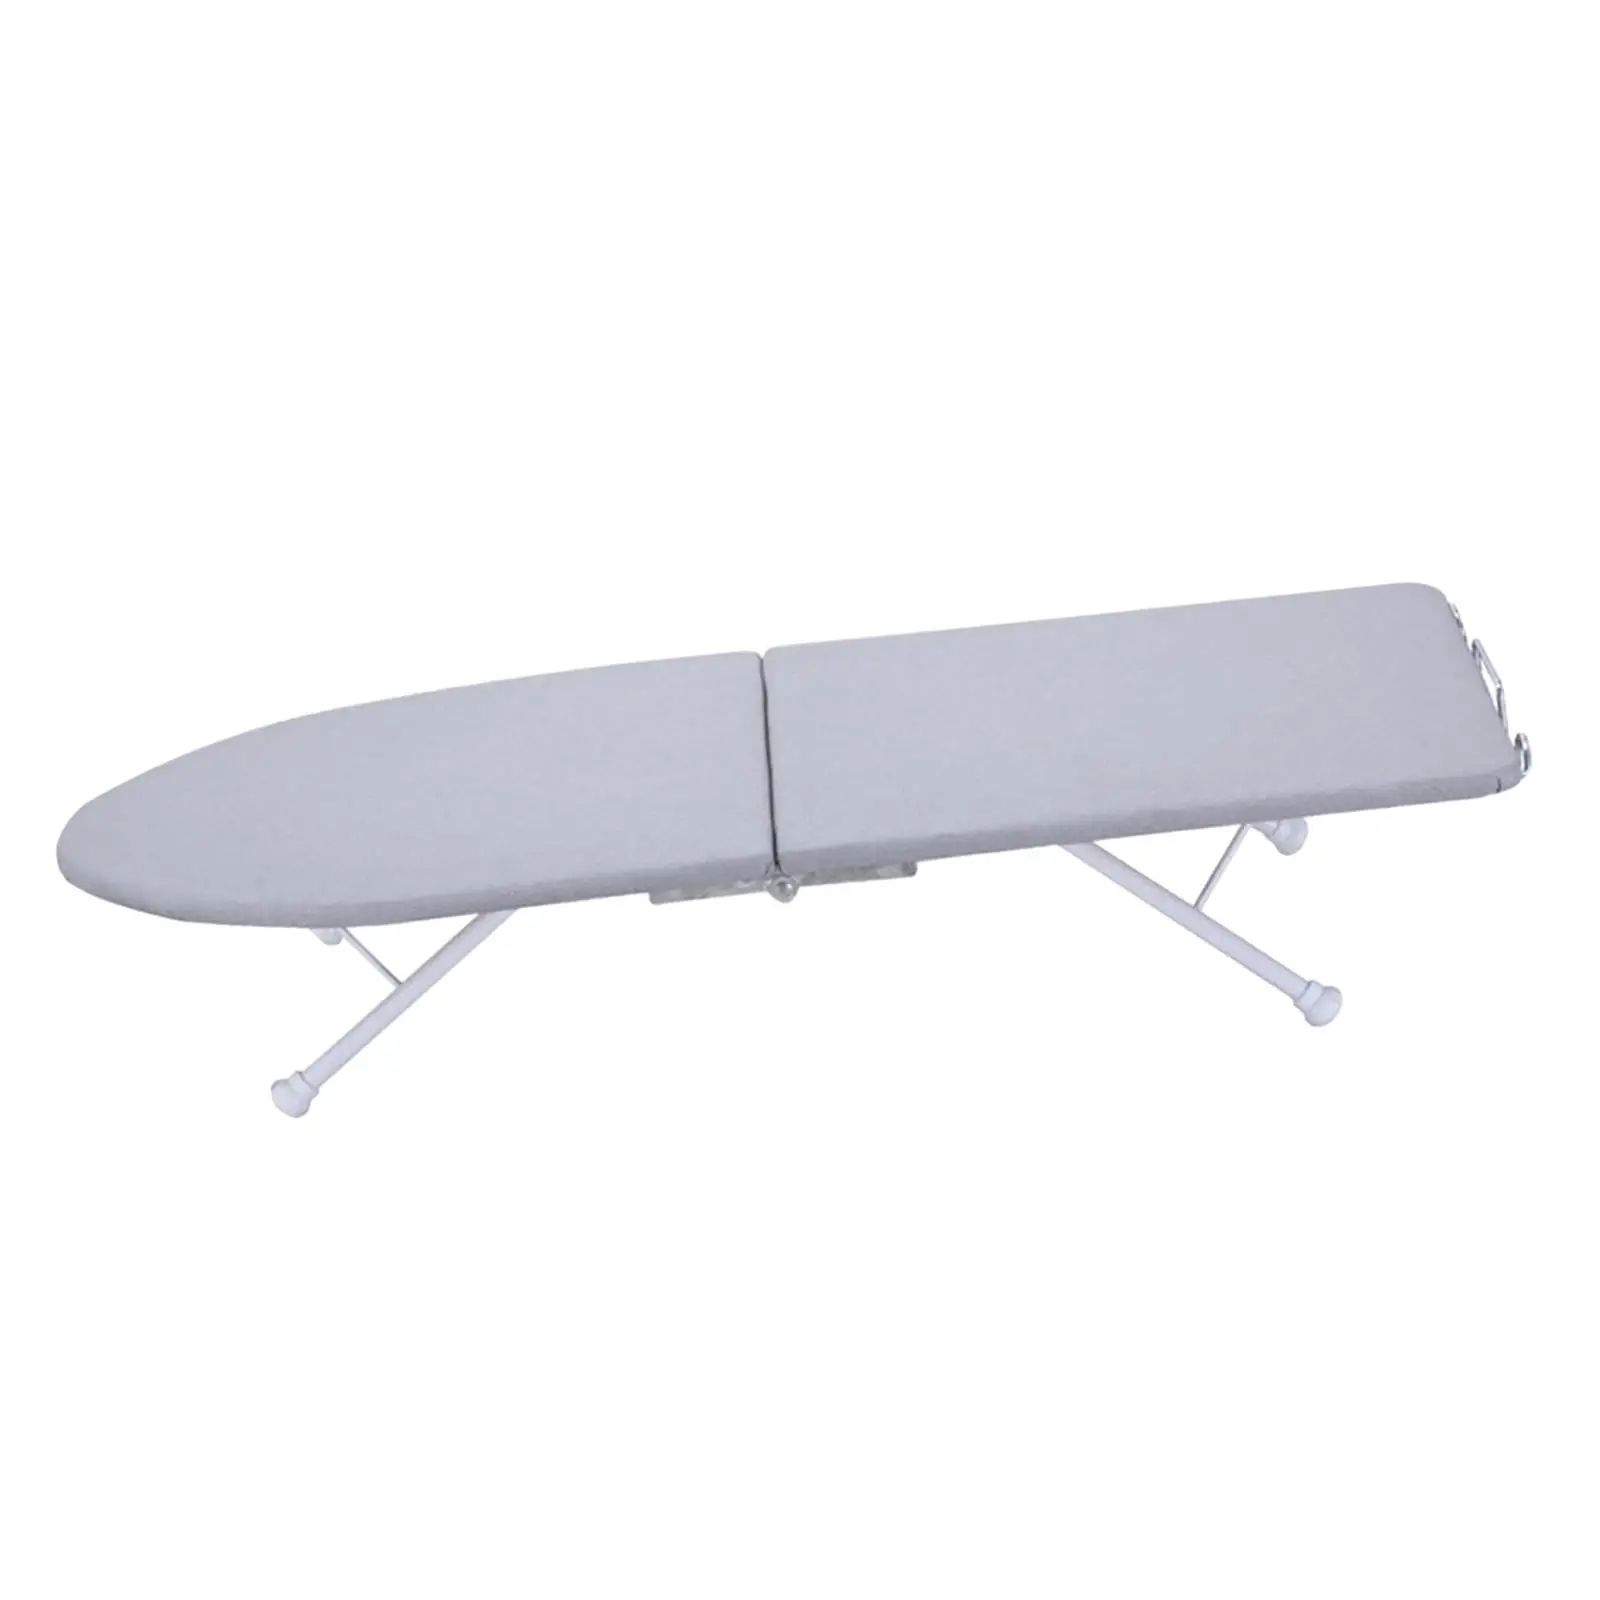 Tabletop Ironing Board Space Saving Compact Ironing Table Foldable Ironing Board for Apartment, Craft Room, Household, Dorm